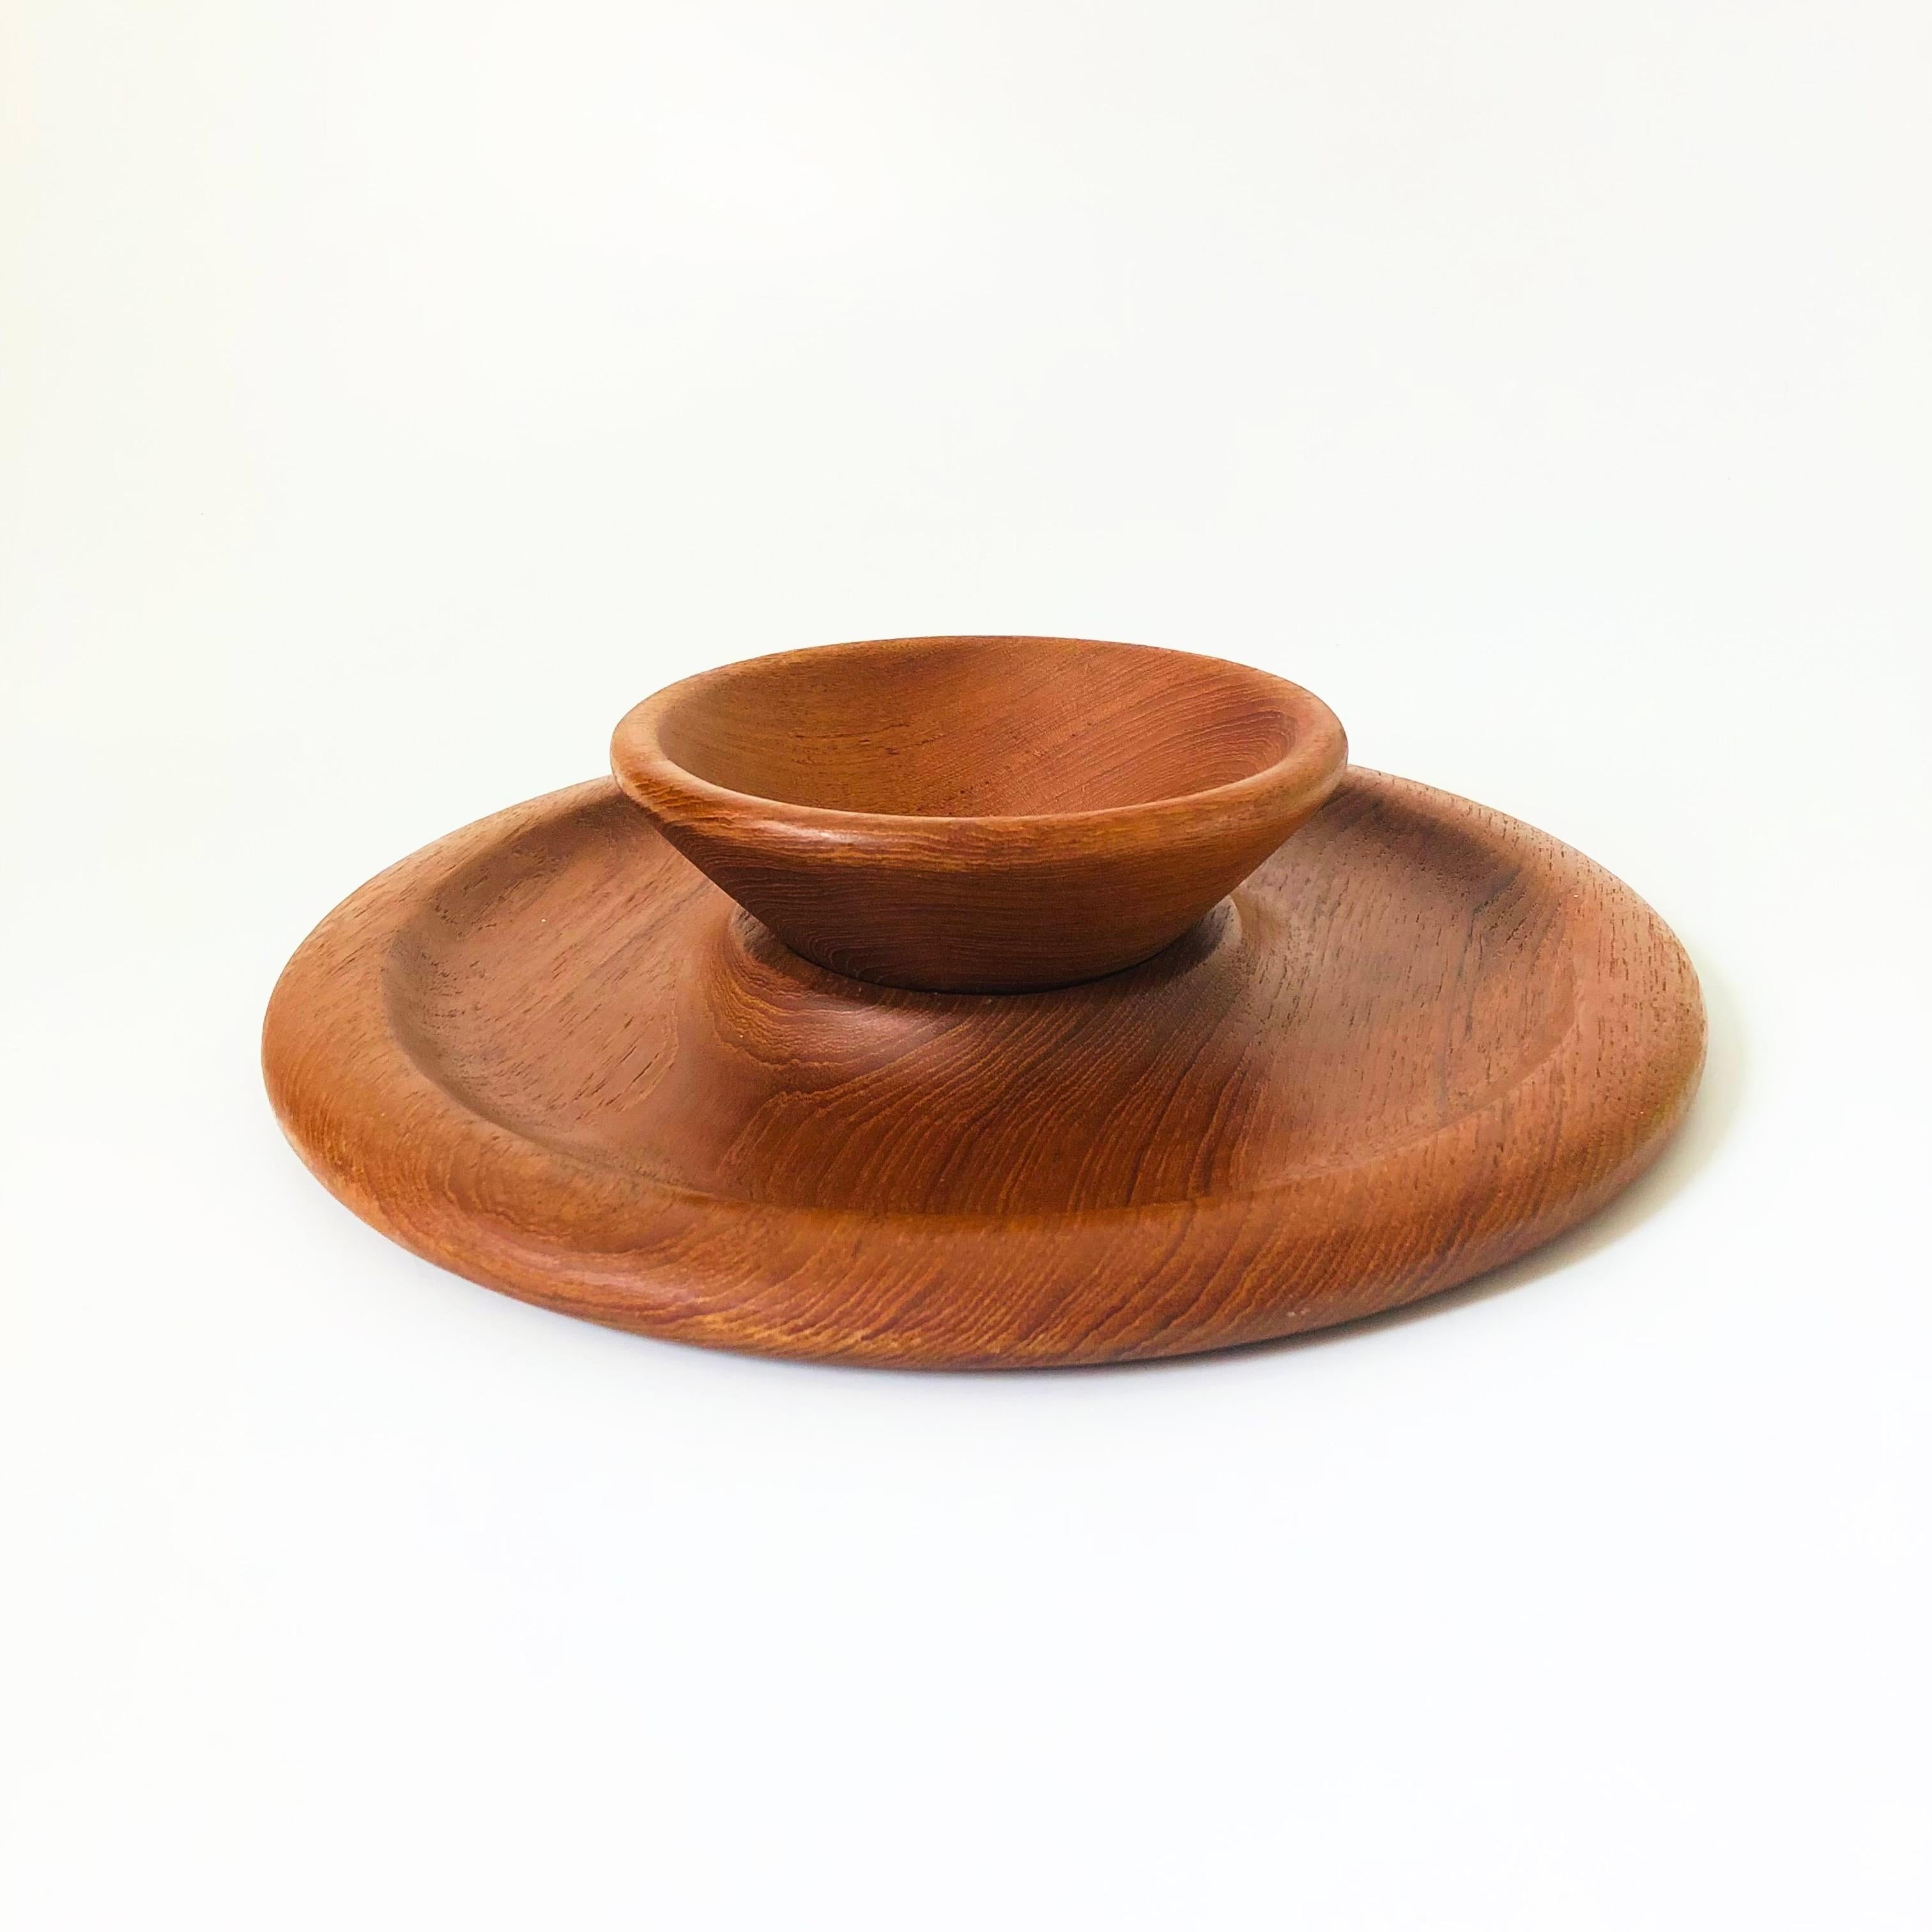 A vintage teak chip and dip tray. Includes a smaller removable bowl in the center. Raised rim along the edge for keeping things in places. Beautiful natural grain to the wood.
Measurements:
Overall: 12